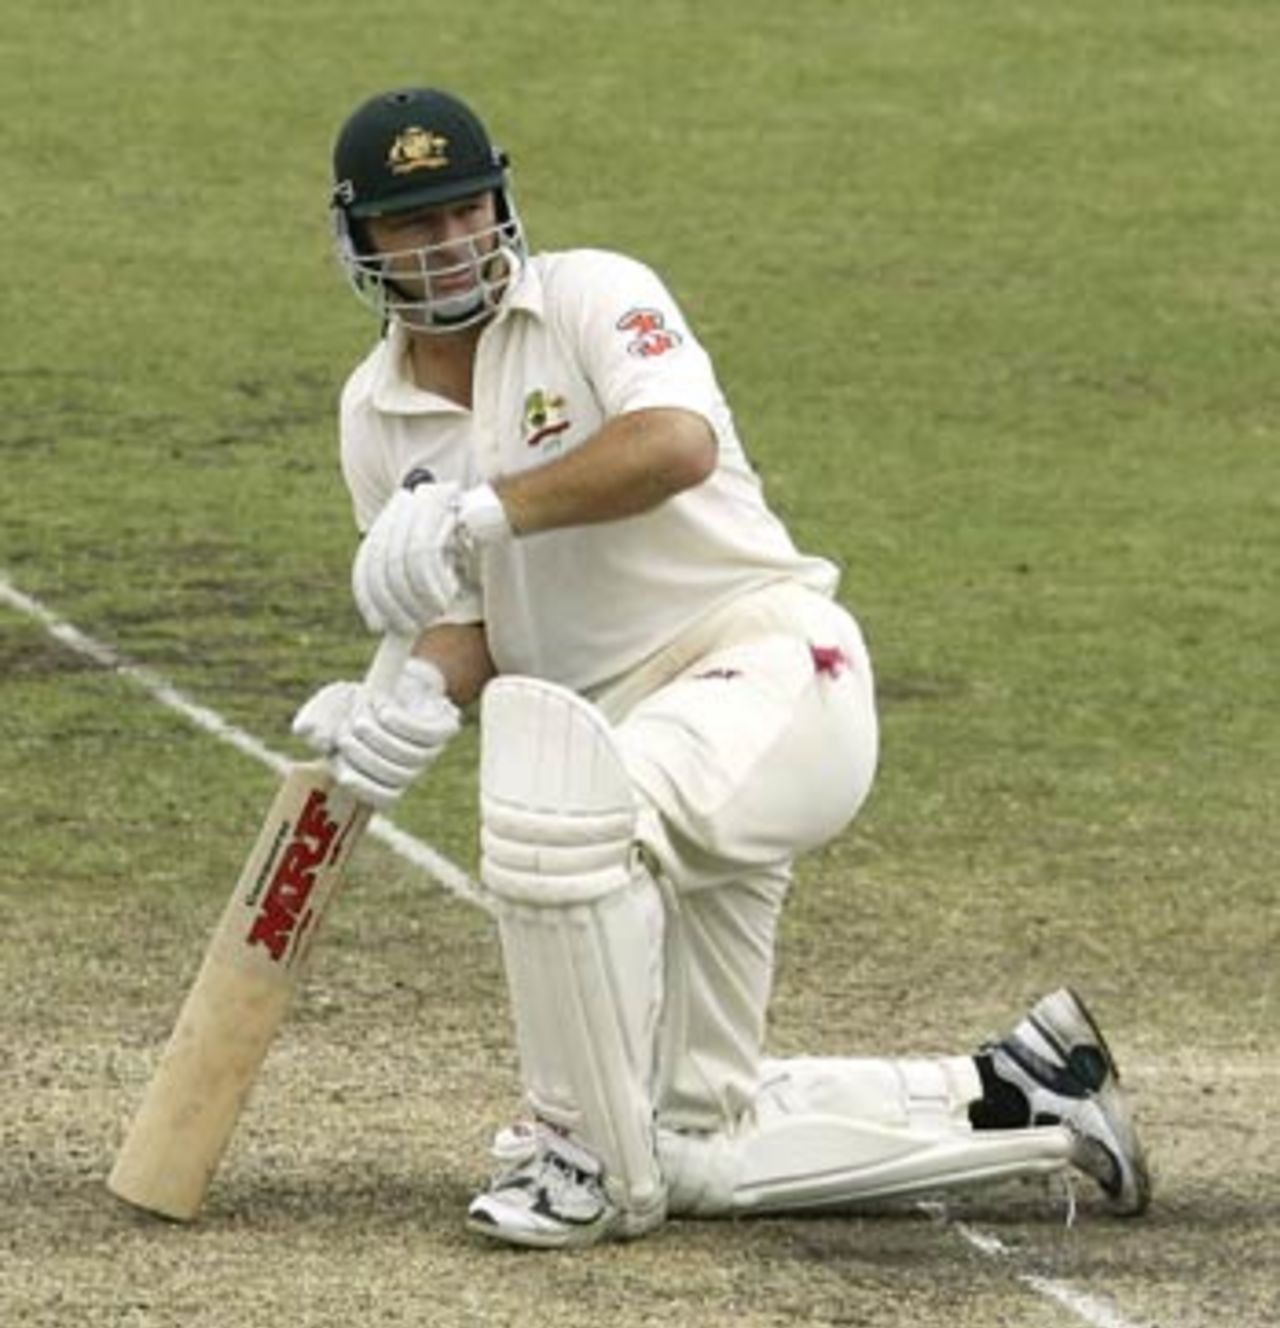 As soon as he hit it Steve Waugh knew the catch was going straight to Sachin Tendulkar, Australia v India, 4th Test, Sydney, 5th day, January 6, 2004